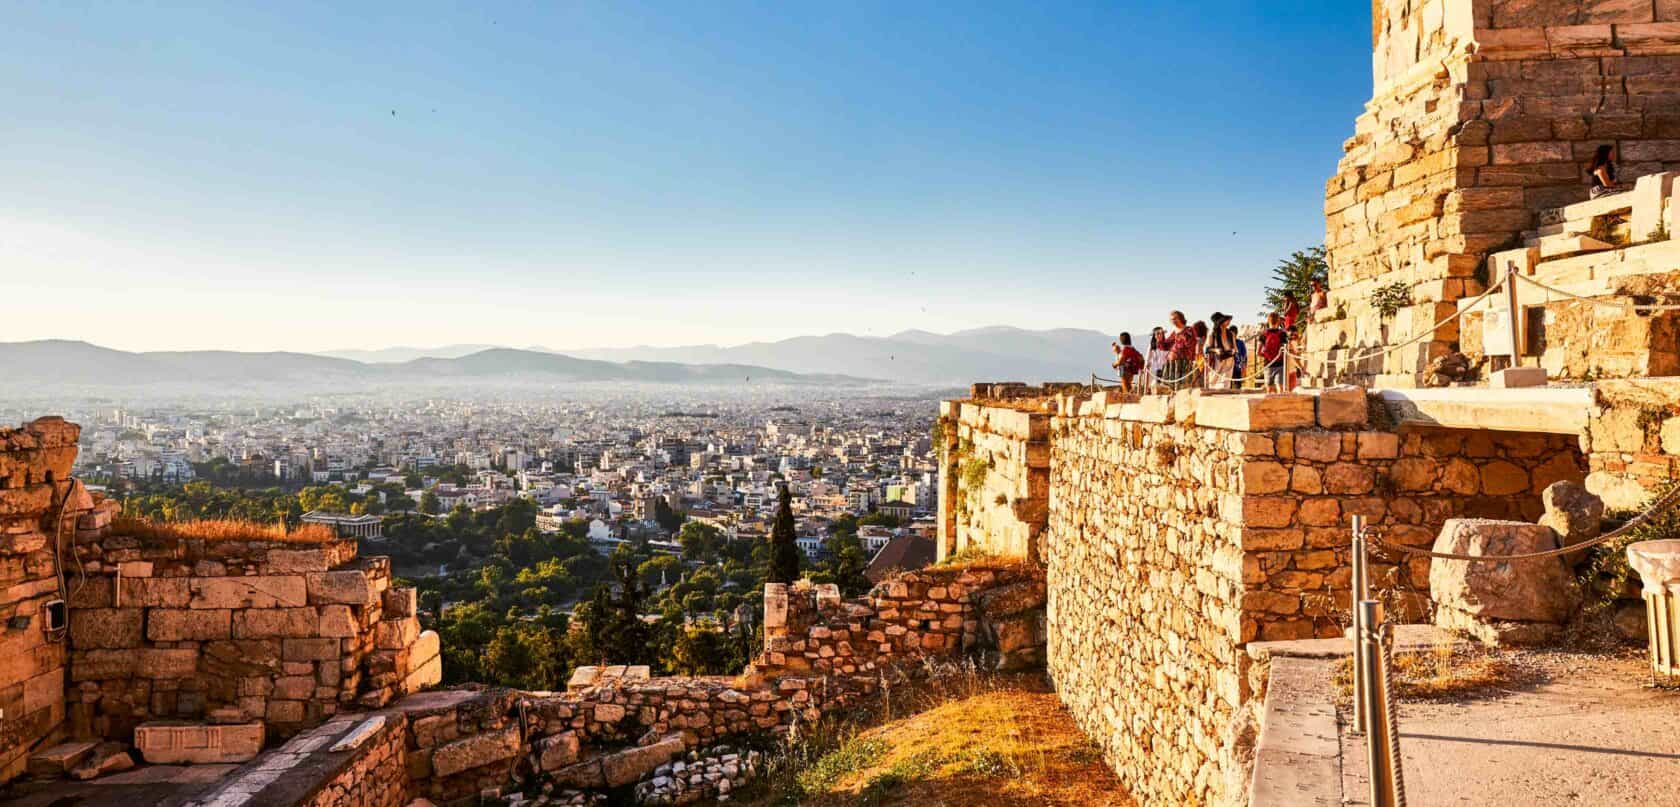 A view of Athens from a mountain.